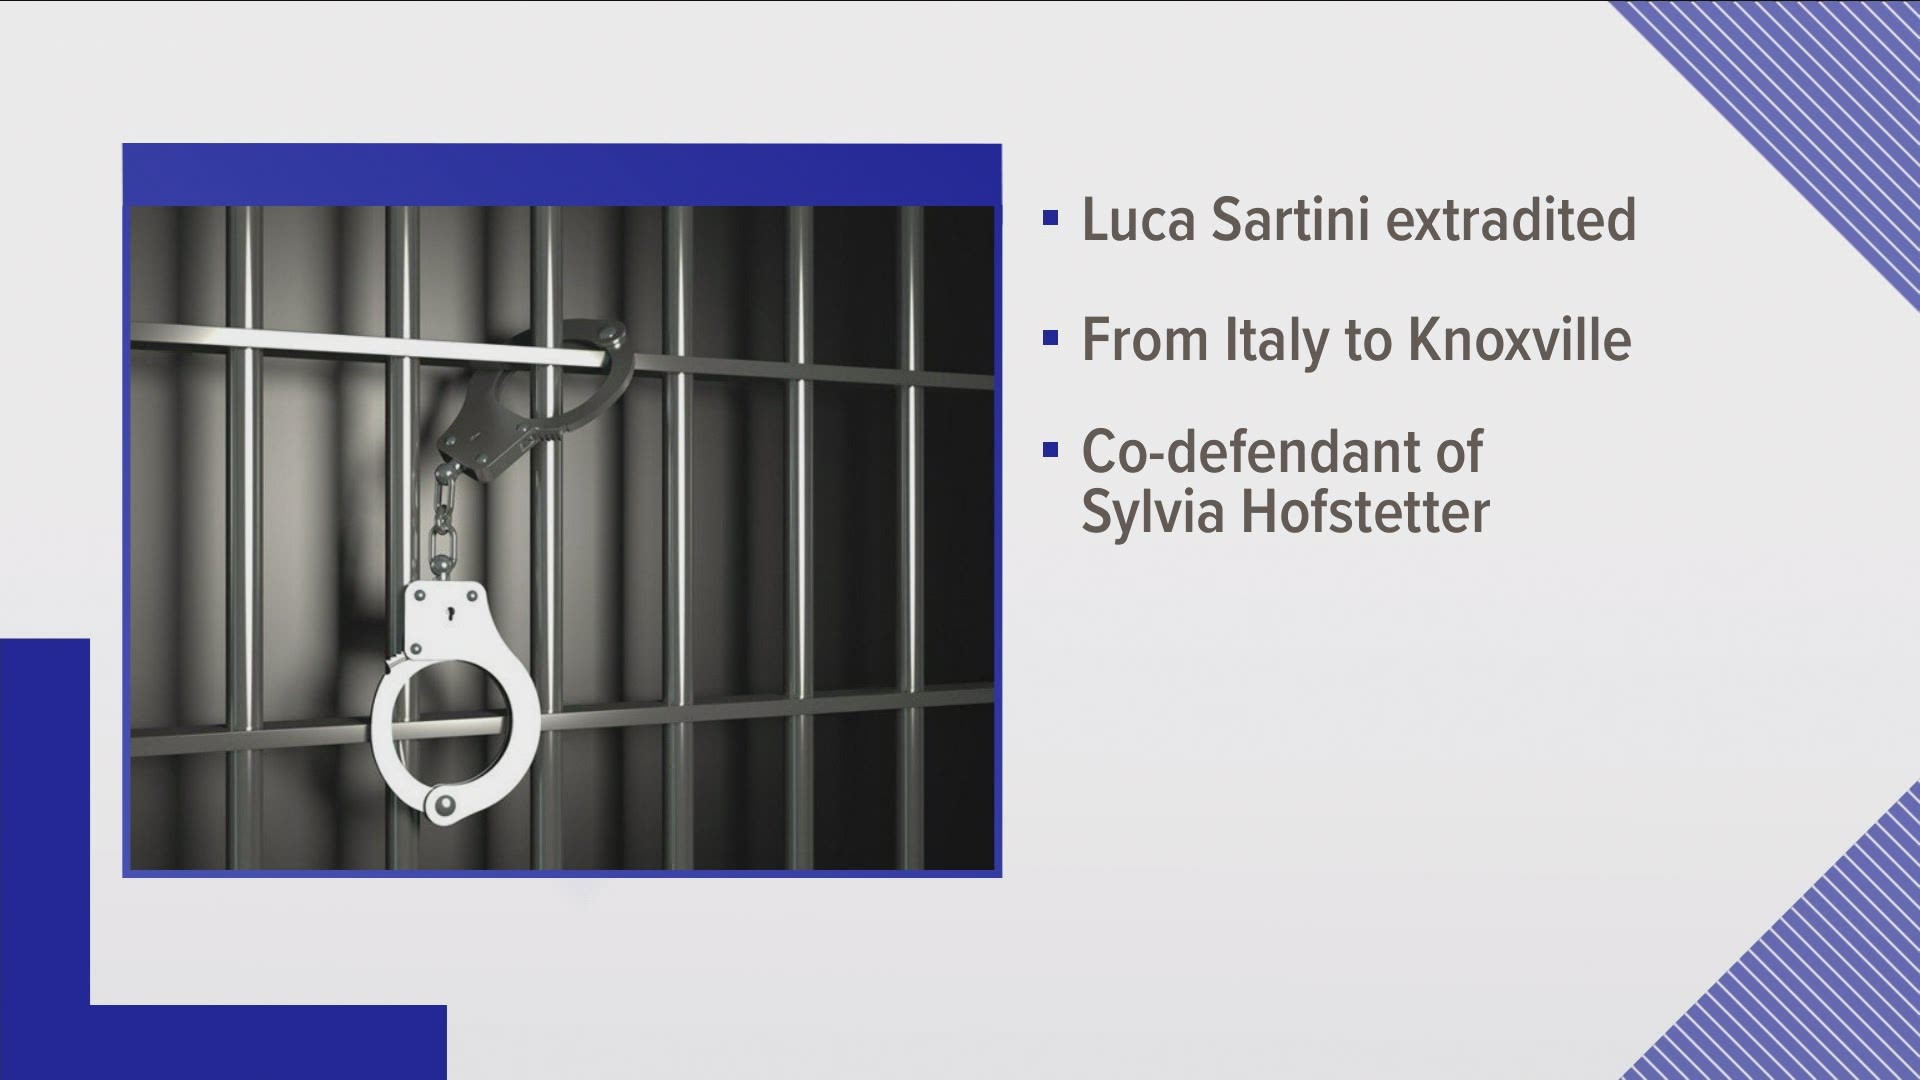 Authorities say Luca Sartini of Italy has been extradited by the United States Marshals Service. Sartini is a co-defendant of Sylvia Hofstetter.